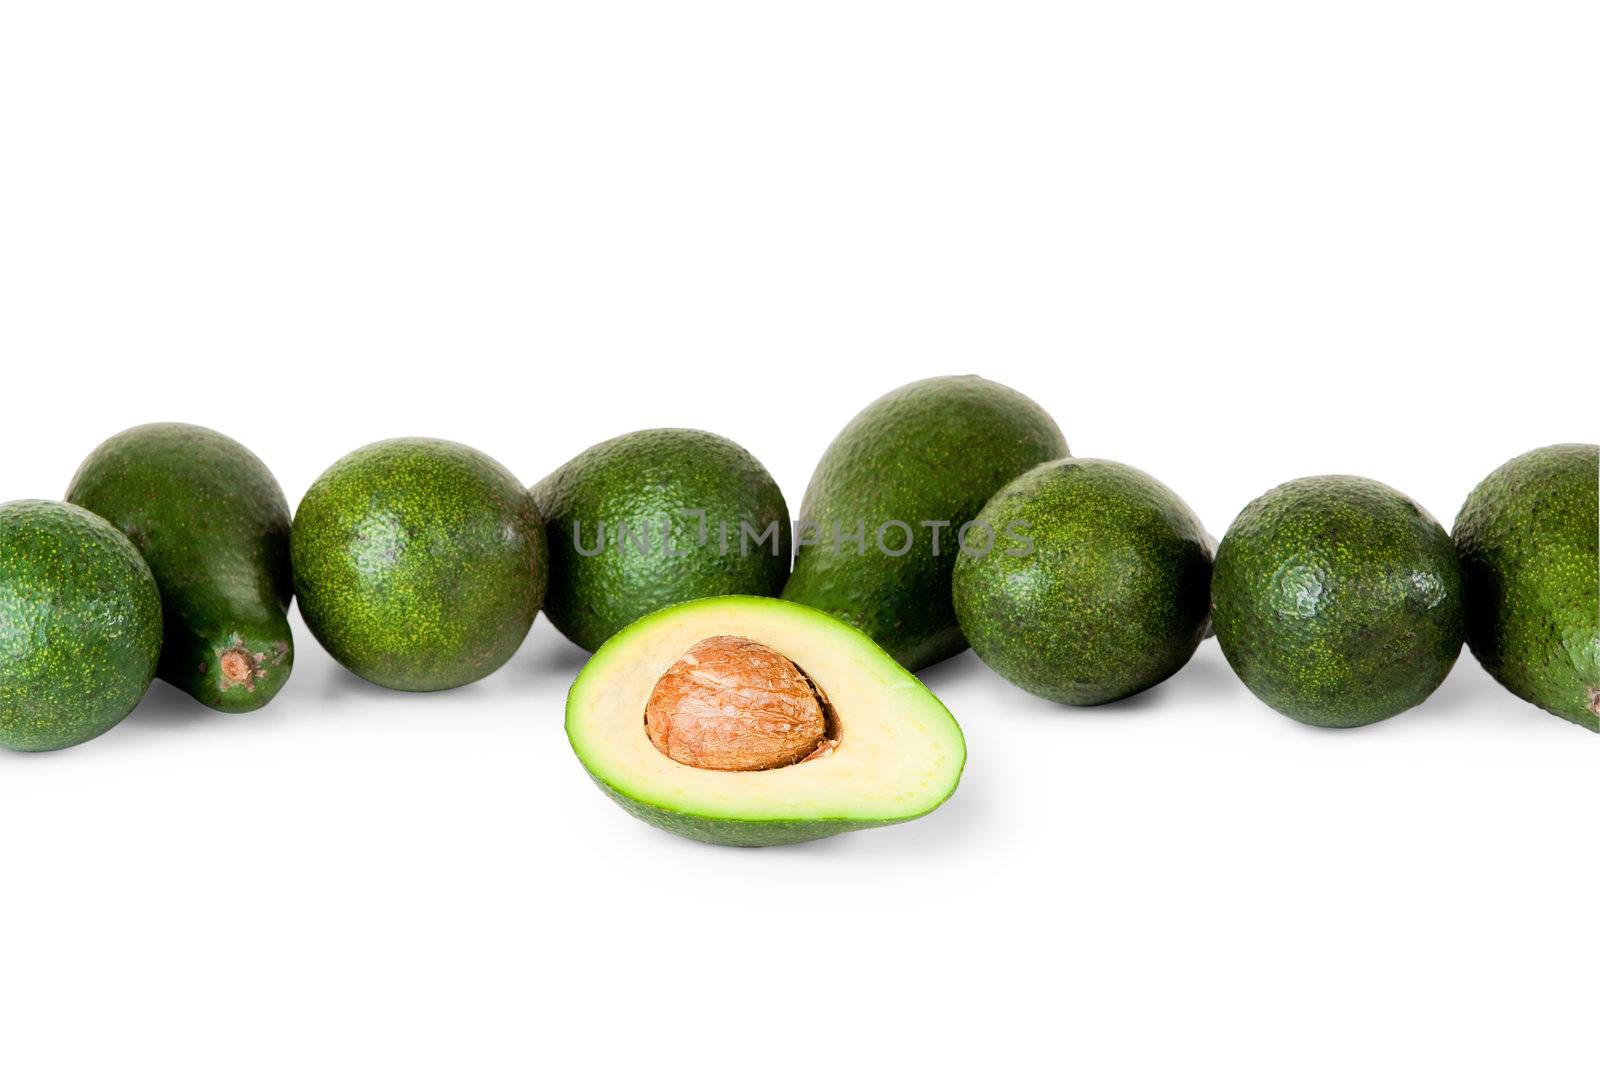 One avocado in front of several more on white background